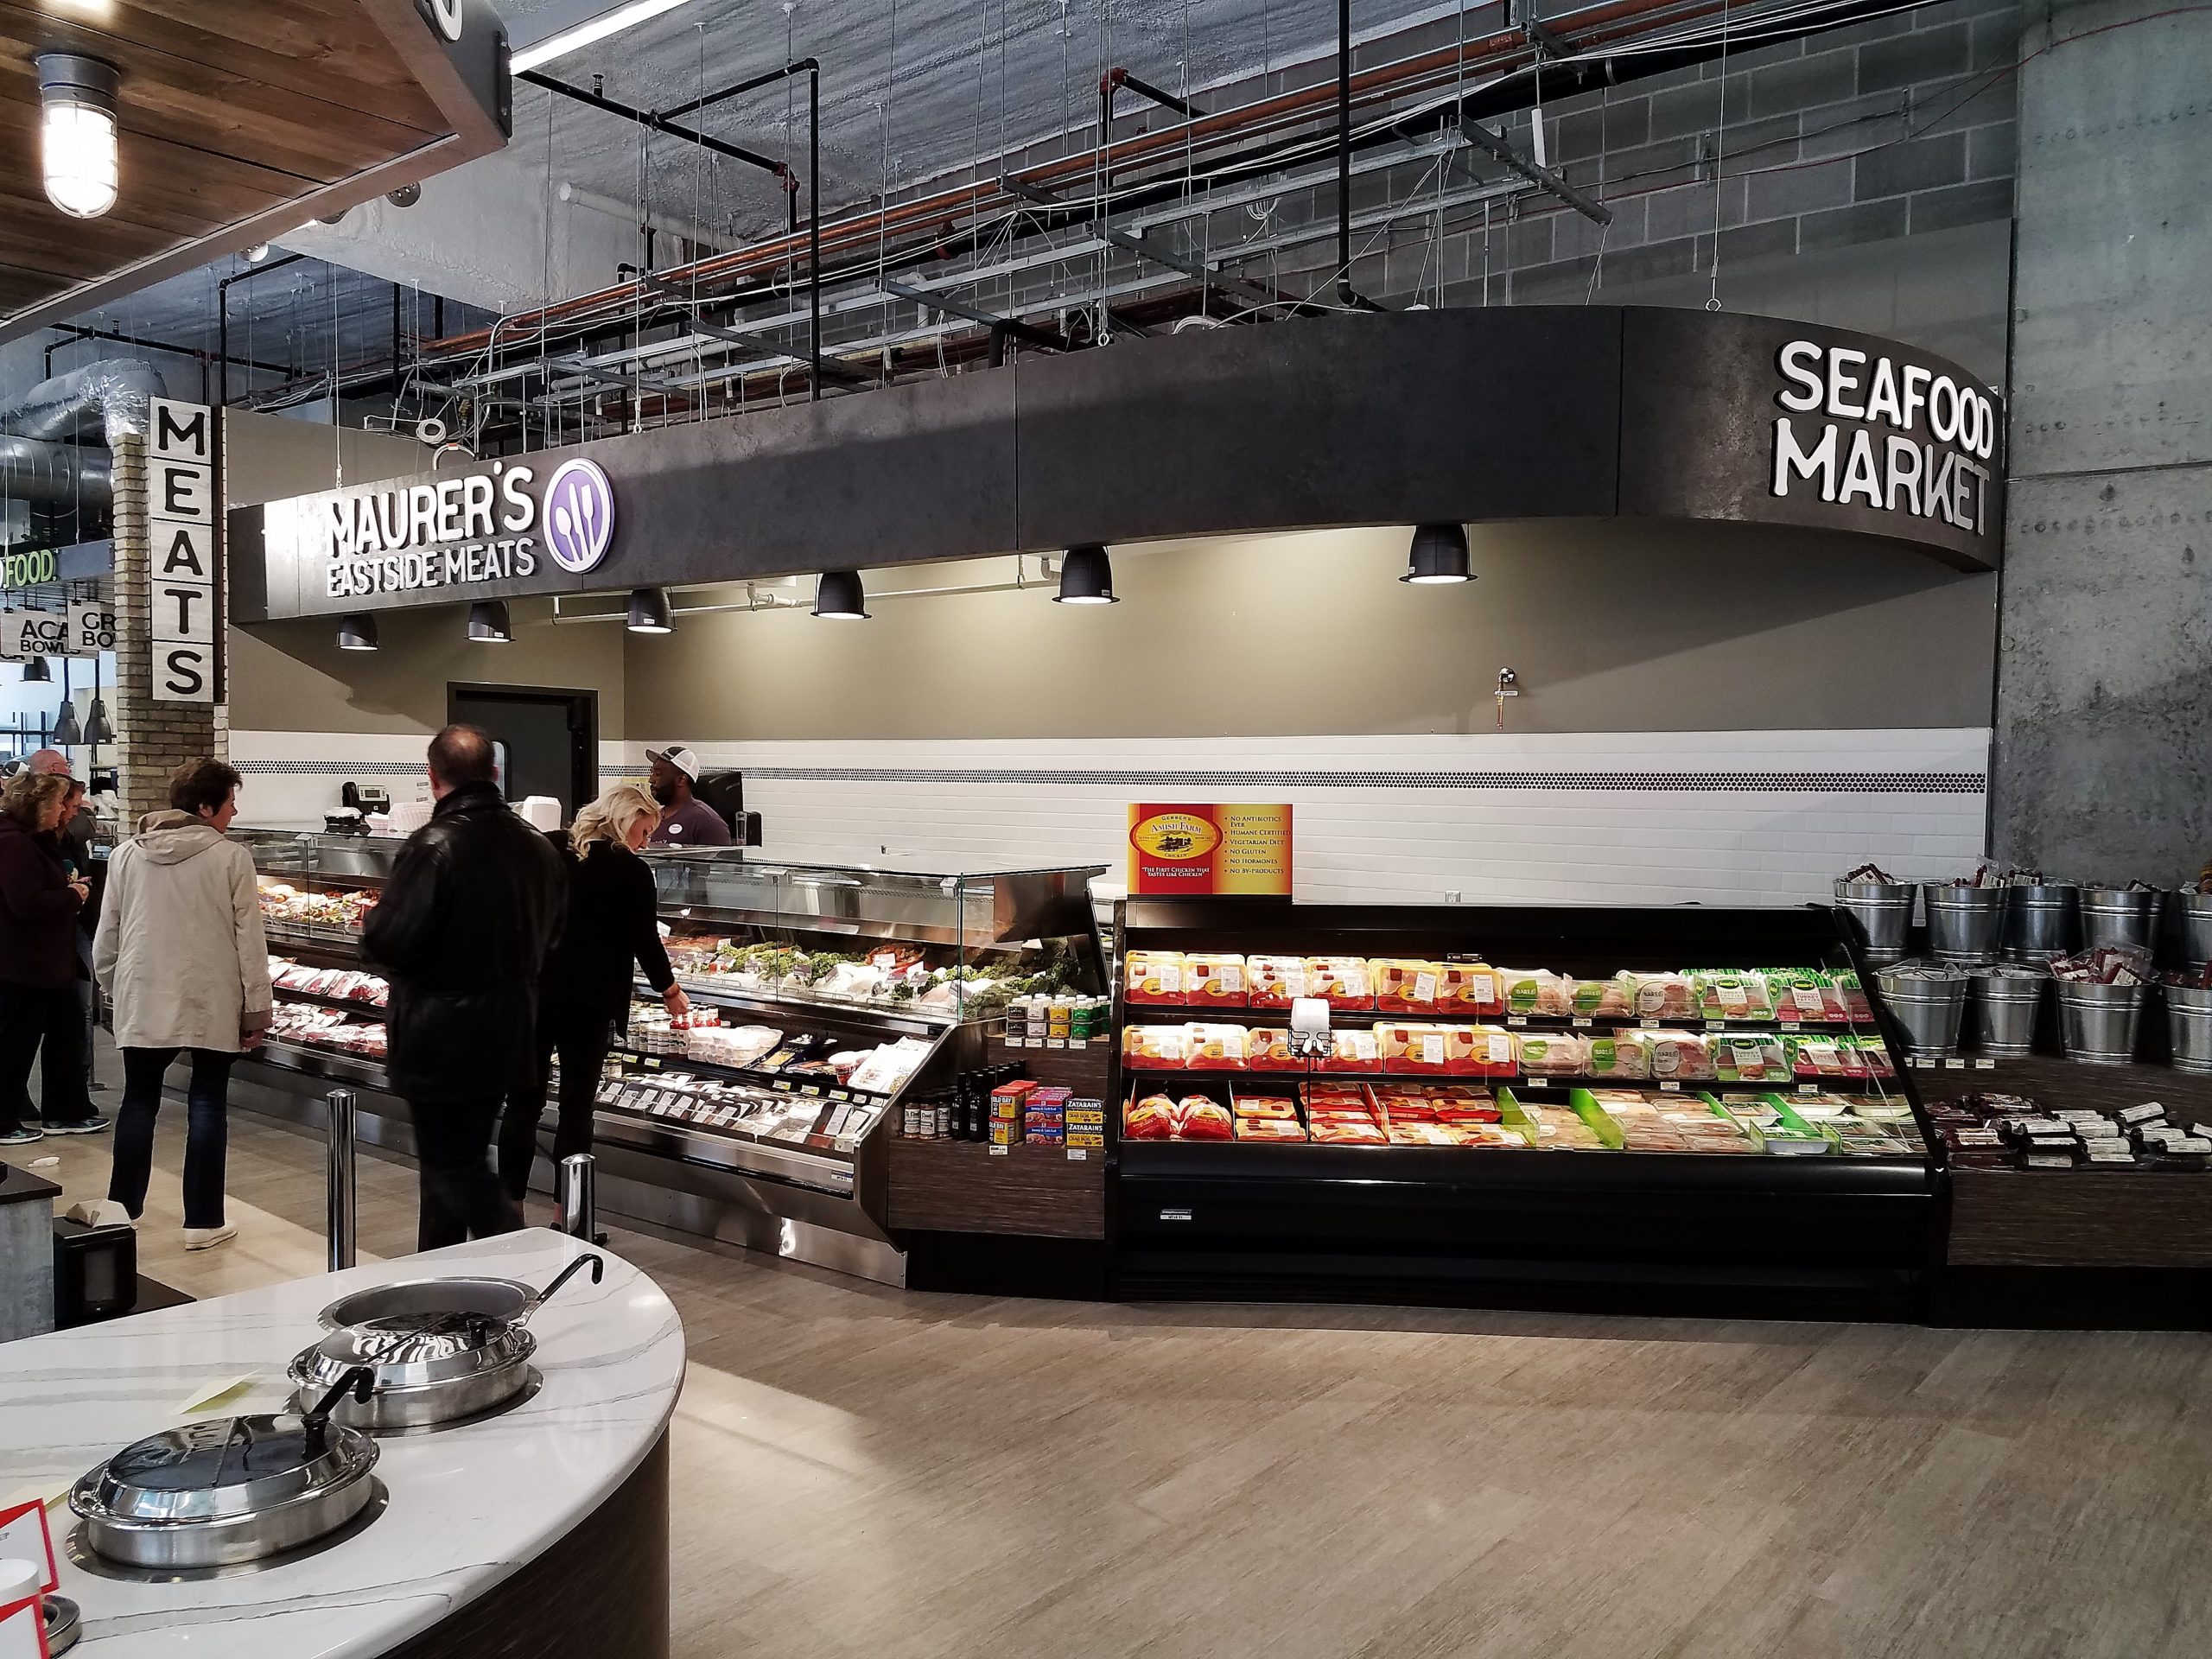 StoreMasters design included unique soffit details within the full-service deli, meat and seafood departments